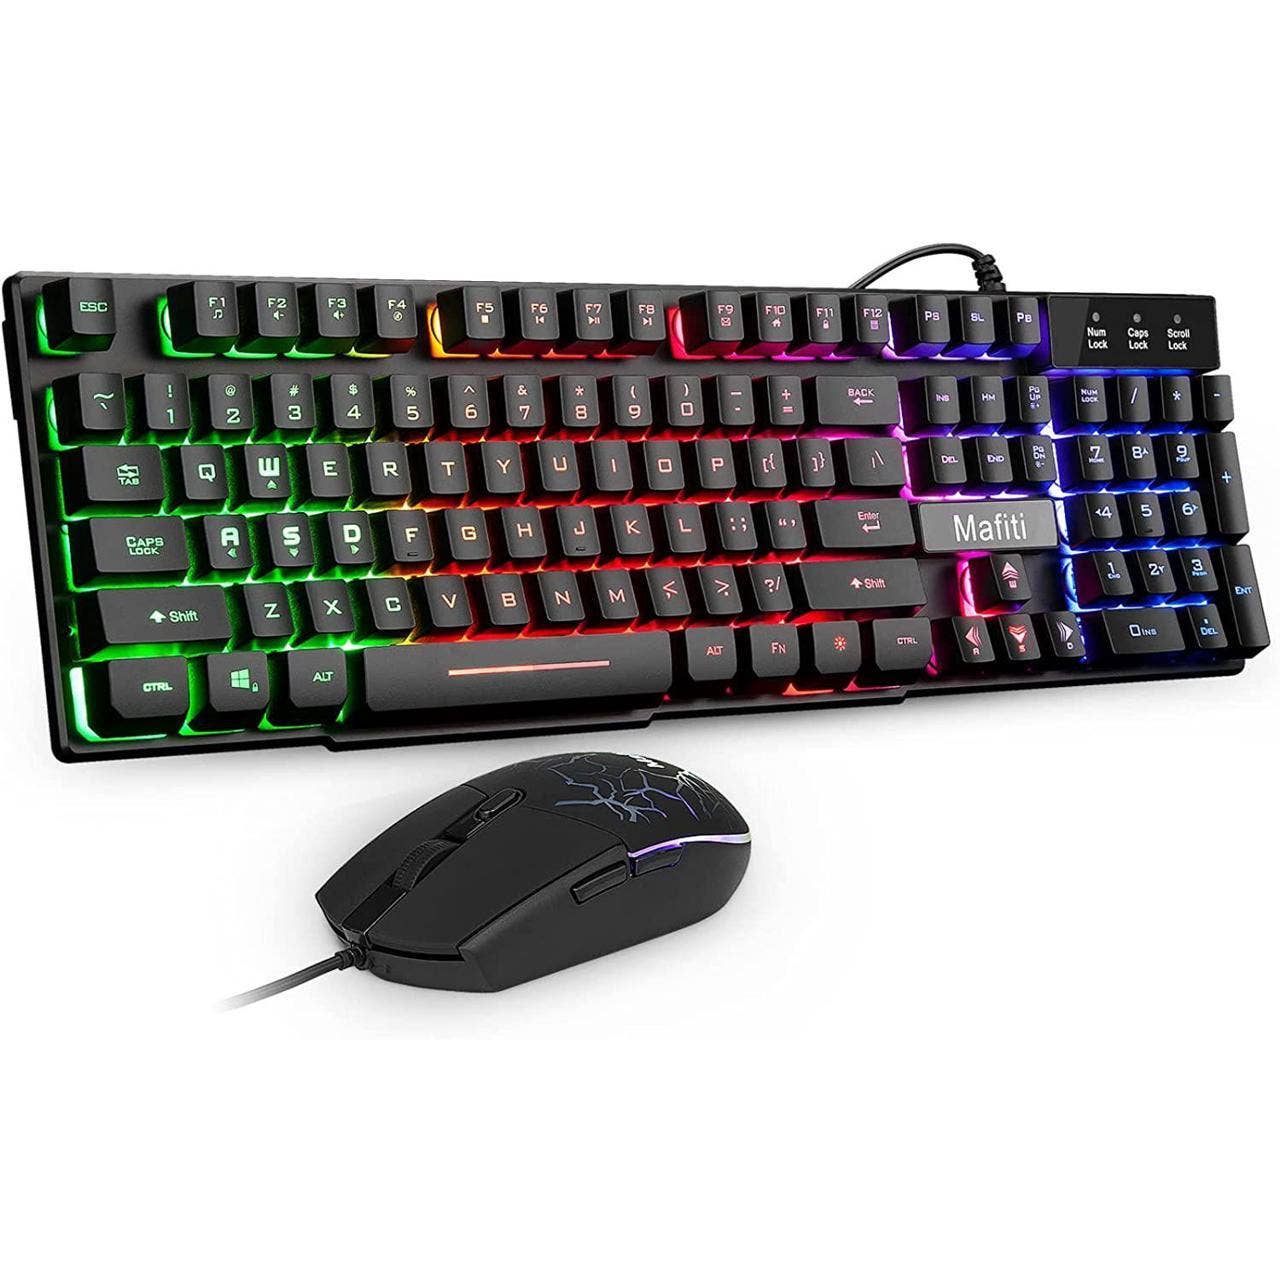 NEW Mafiti Colorful Backlit Gaming Keyboard with mouse